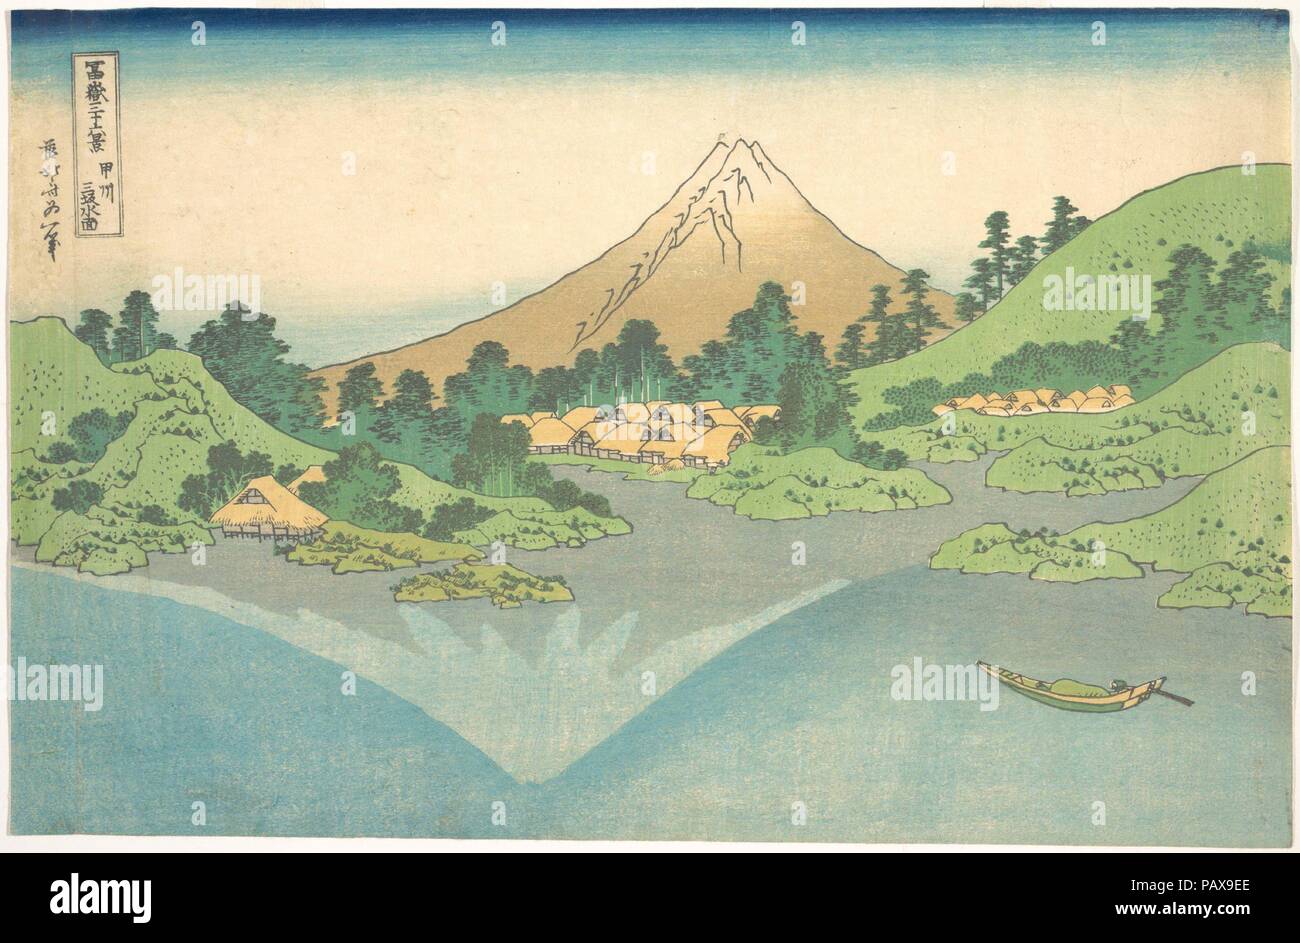 Reflection in Lake at Misaka in Kai Province (Koshu Misaka suimen), from the series Thirty-six Views of Mount Fuji (Fugaku sanjurokkei. Artist: Katsushika Hokusai (Japanese, Tokyo (Edo) 1760-1849 Tokyo (Edo)). Culture: Japan. Dimensions: 9 5/8 x 14 3/4 in. (24.4 x 37.5 cm). Date: ca. 1830-32.  Thirty-six Views of Mount Fuji depicts the mountain in every season and type of weather and from different perspectives. This view of Mount Fuji and its reflection in the placid lake can be seen from Misaka Pass, reached by the Isawa road, which branches off the main road to Edo. Hokusai balanced the com Stock Photo